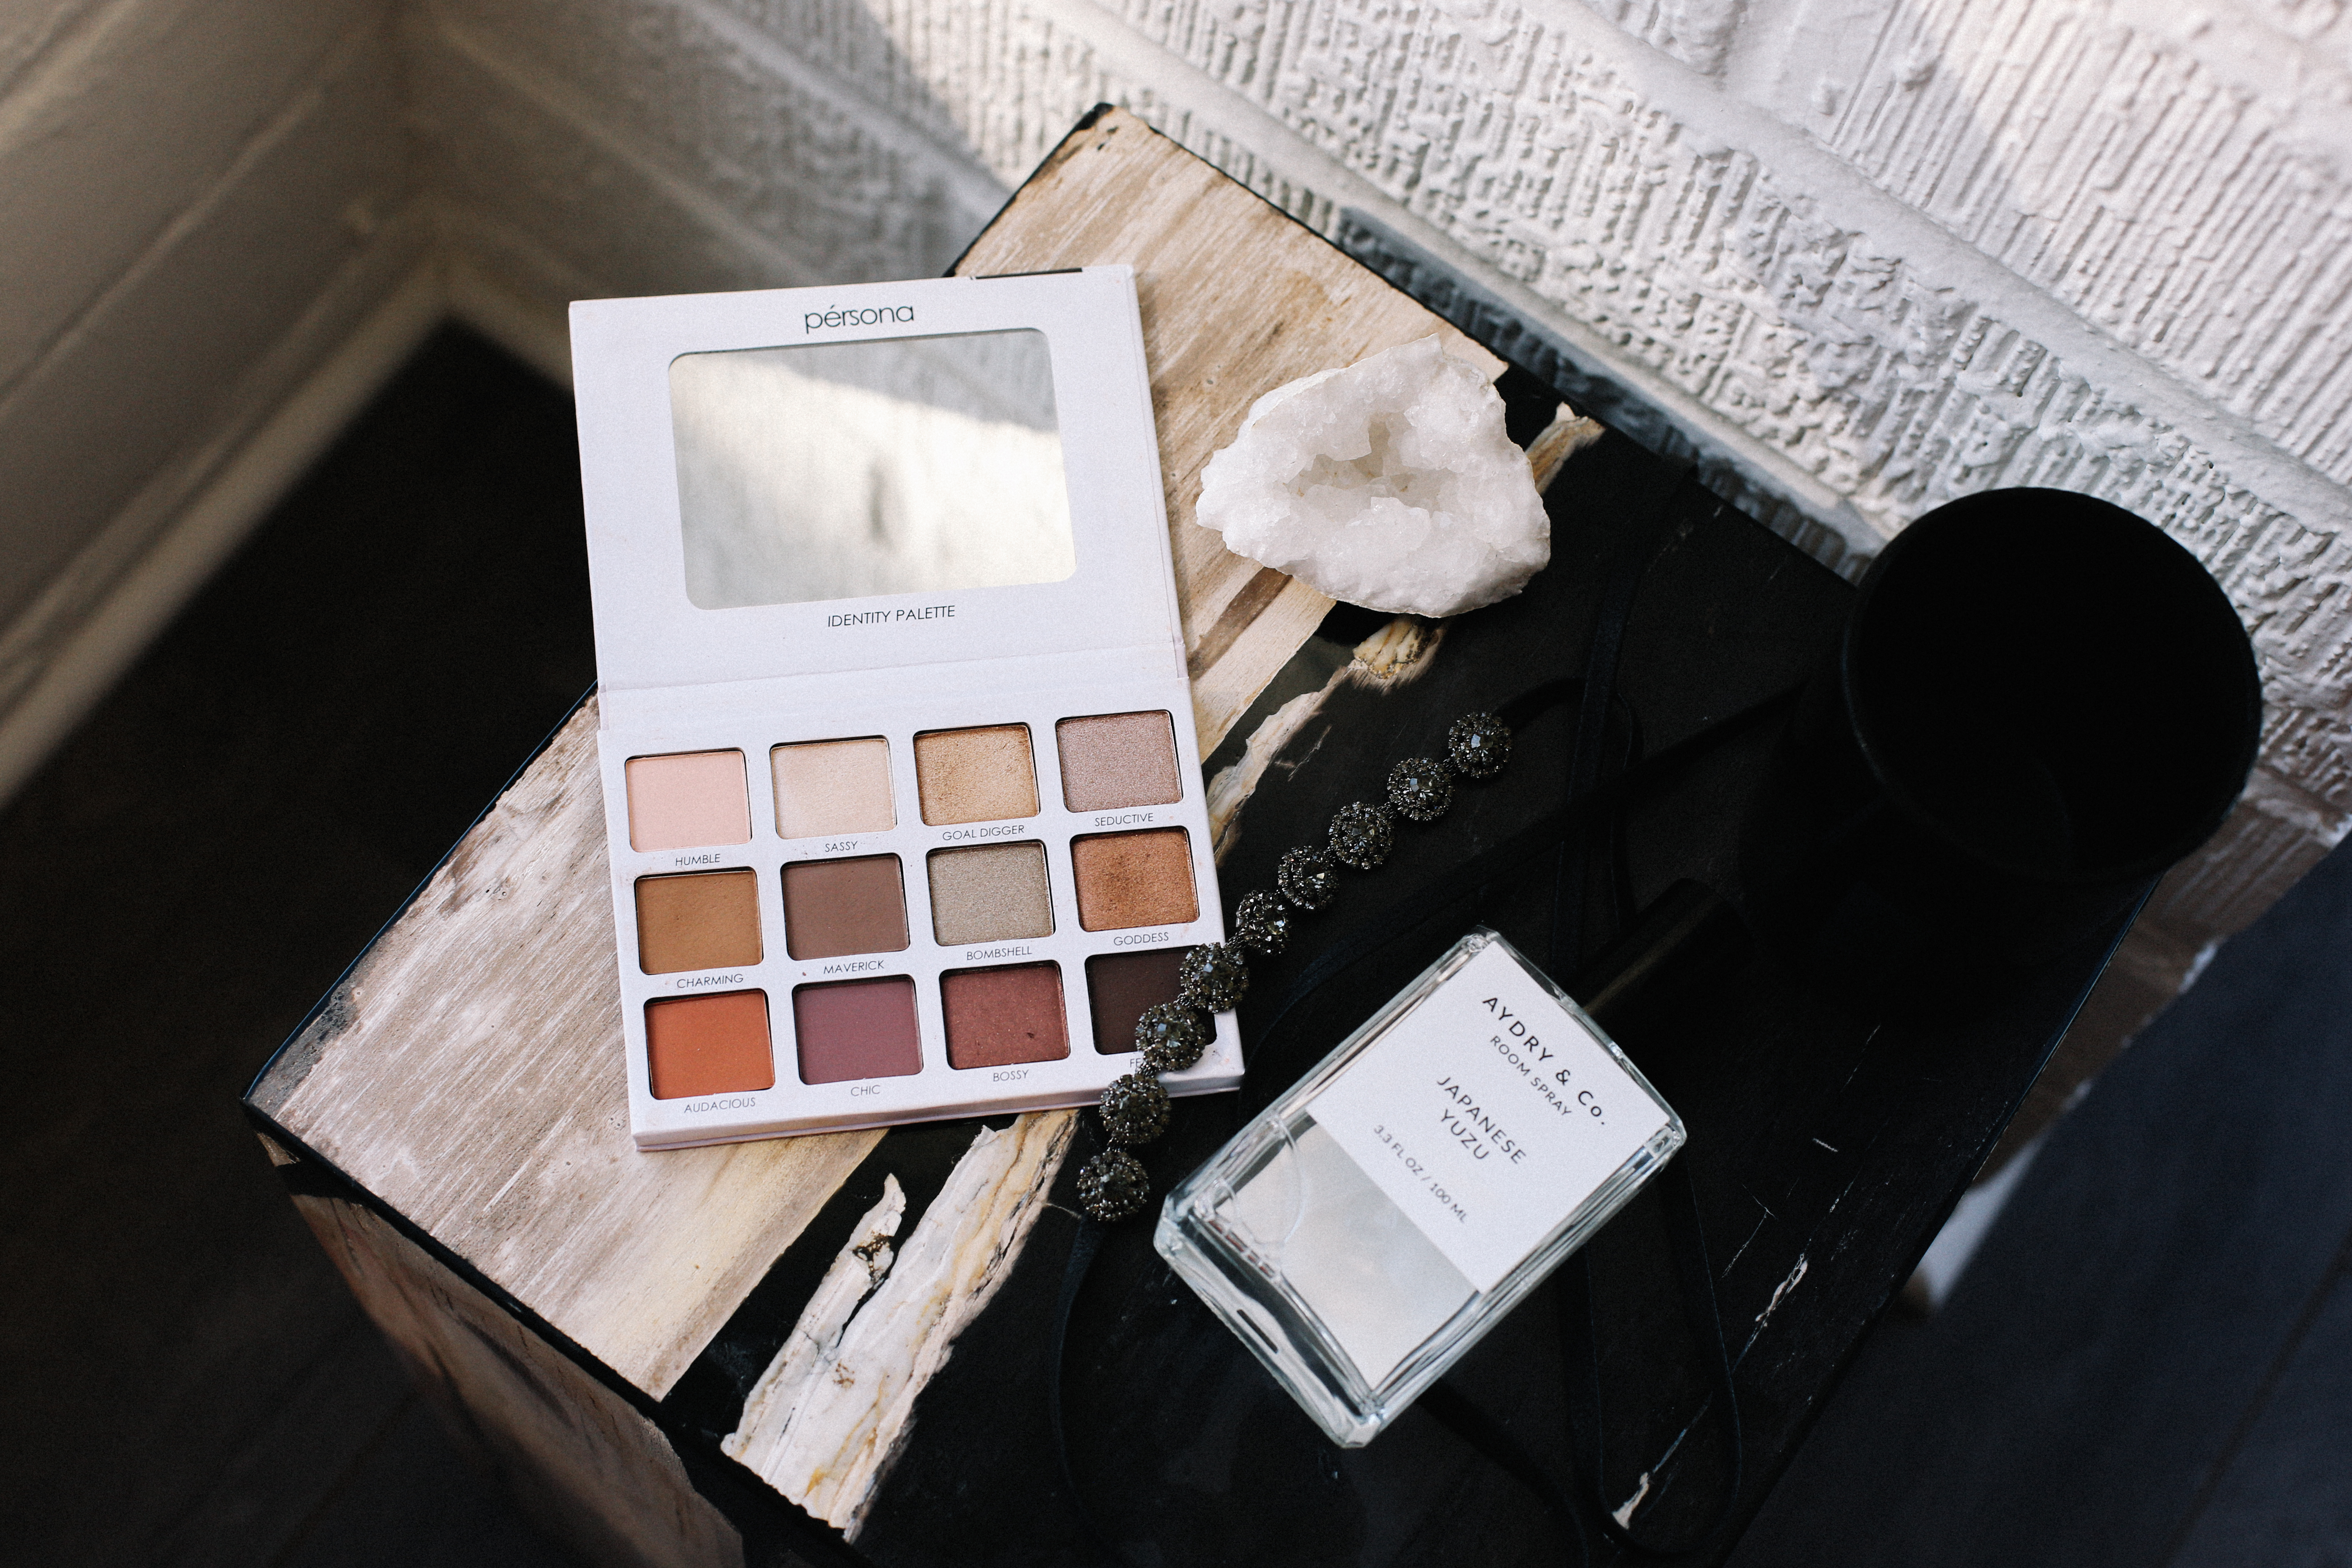 LA Blogger Tania Sarin with her top 10 beauty products including persona identity palette and aydry & co